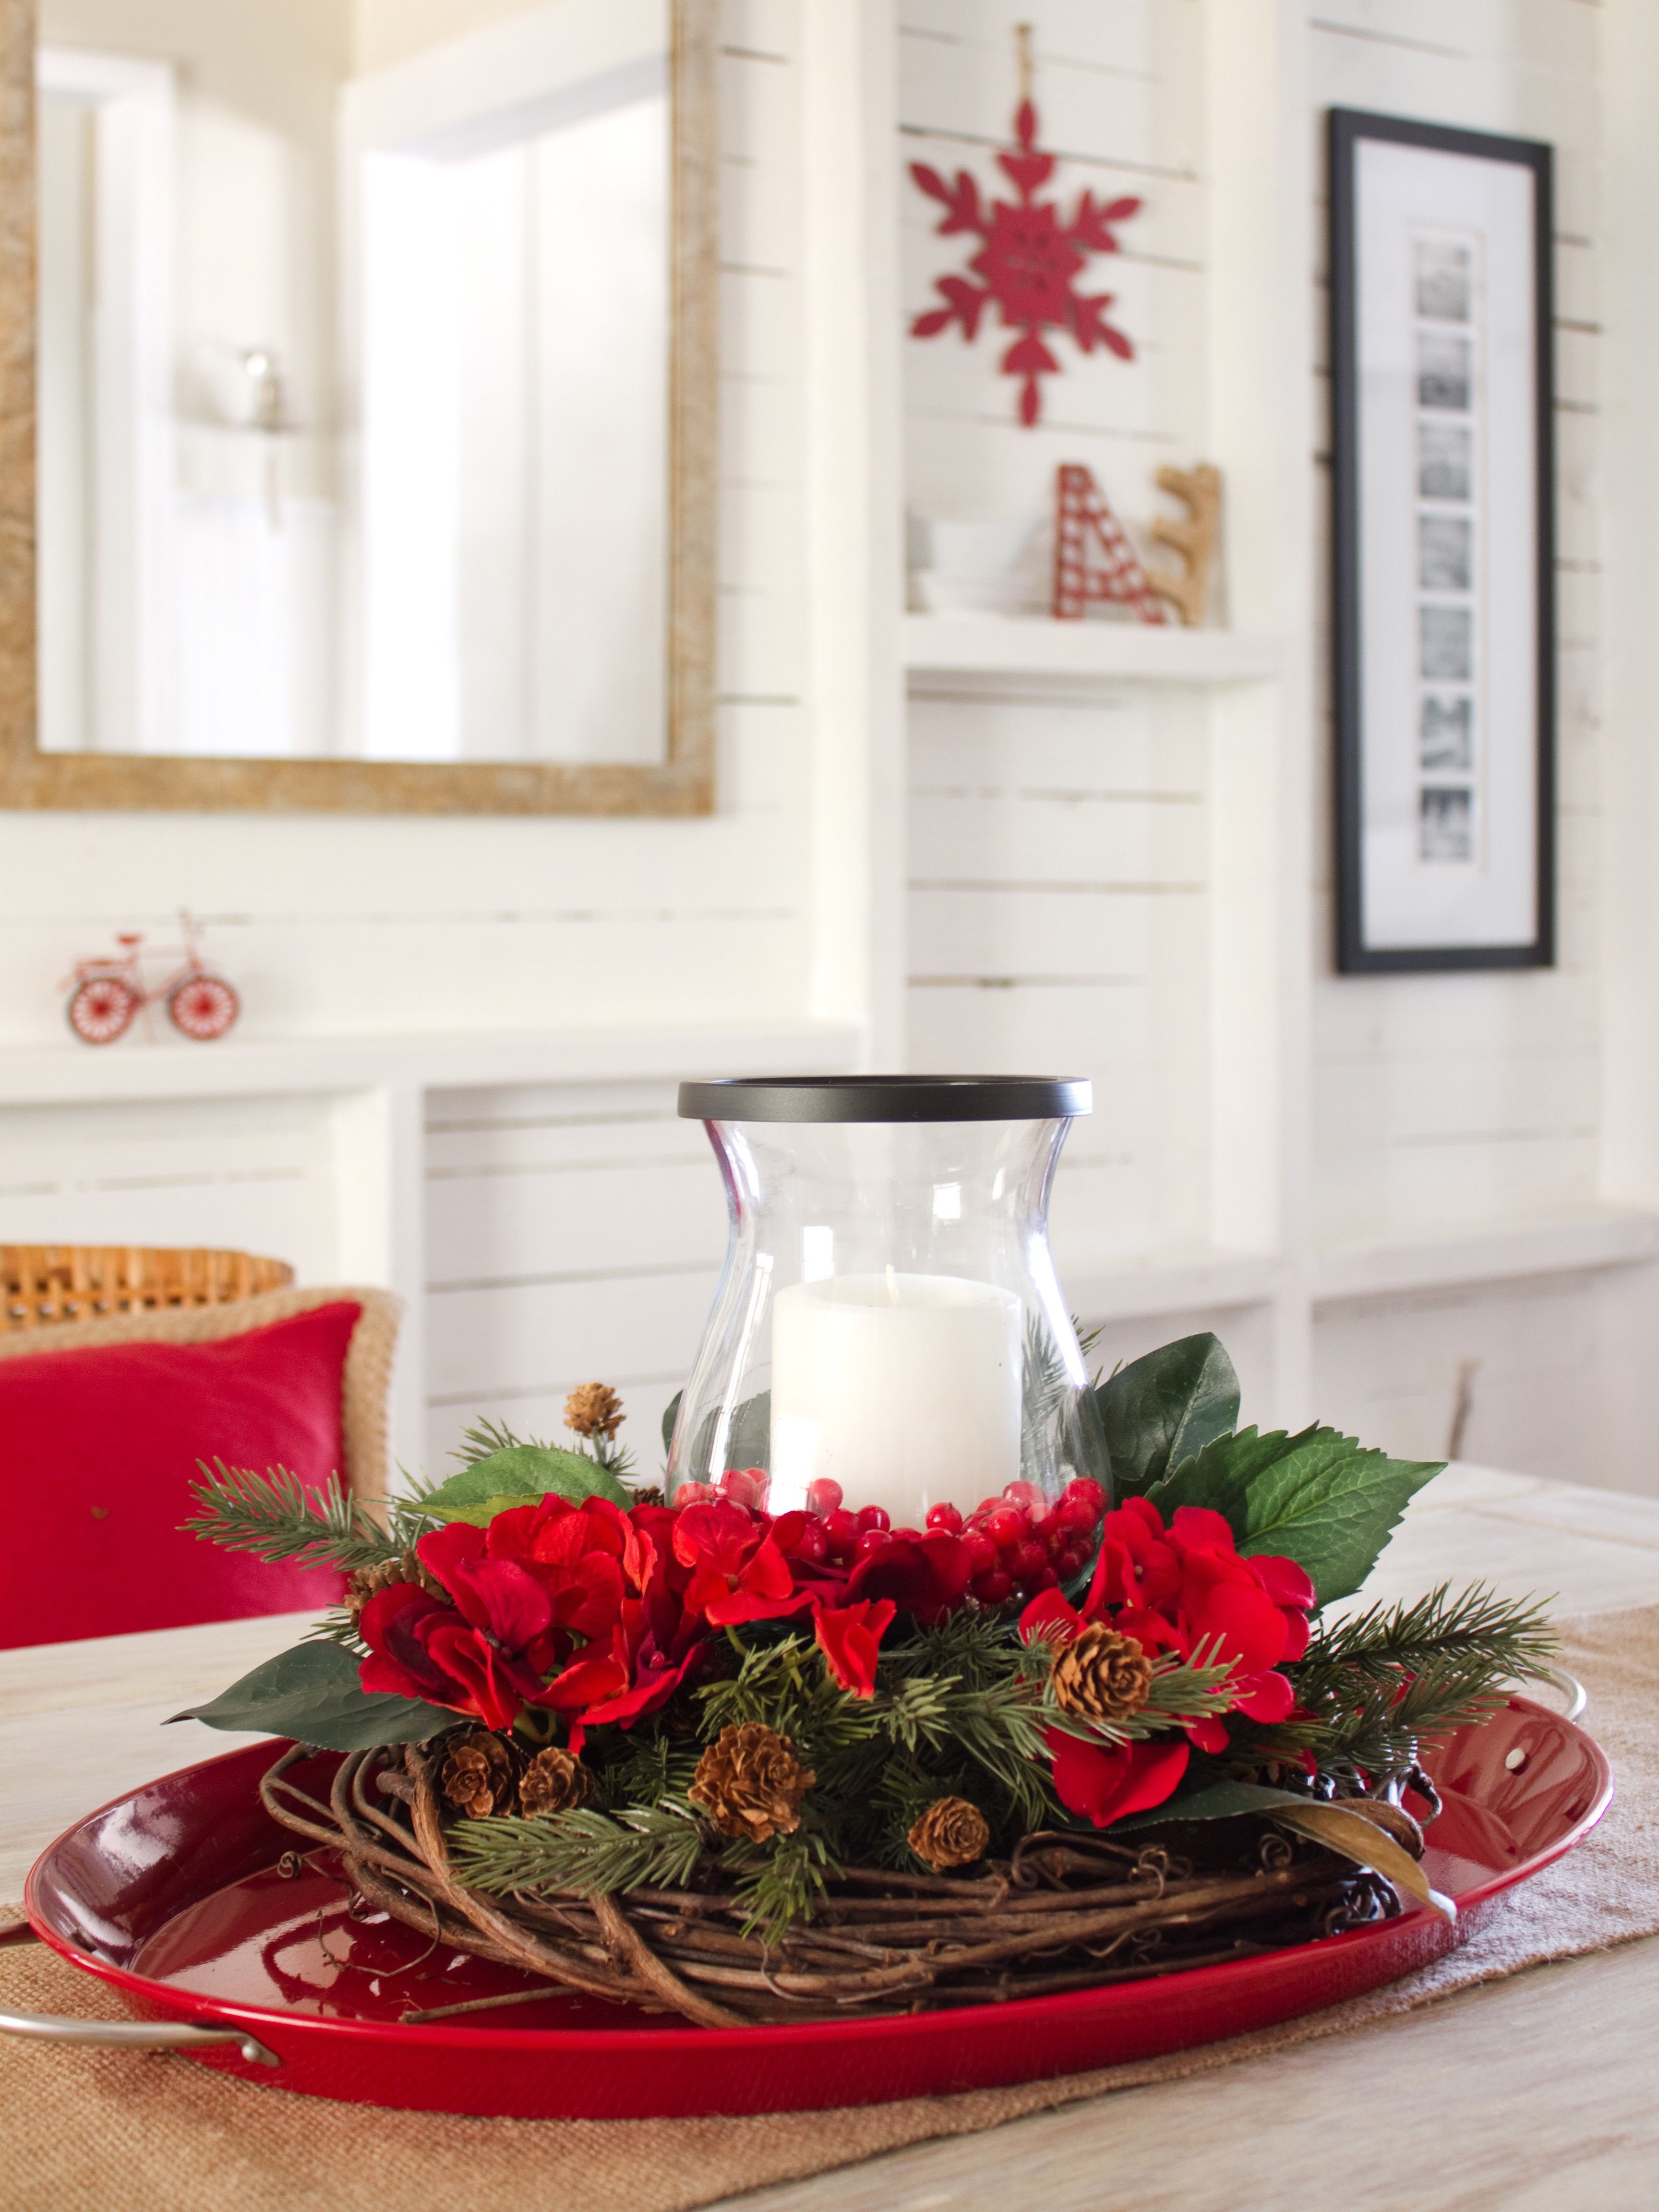 Diy Red Flower And Candle Centerpiece (View 15 of 20)